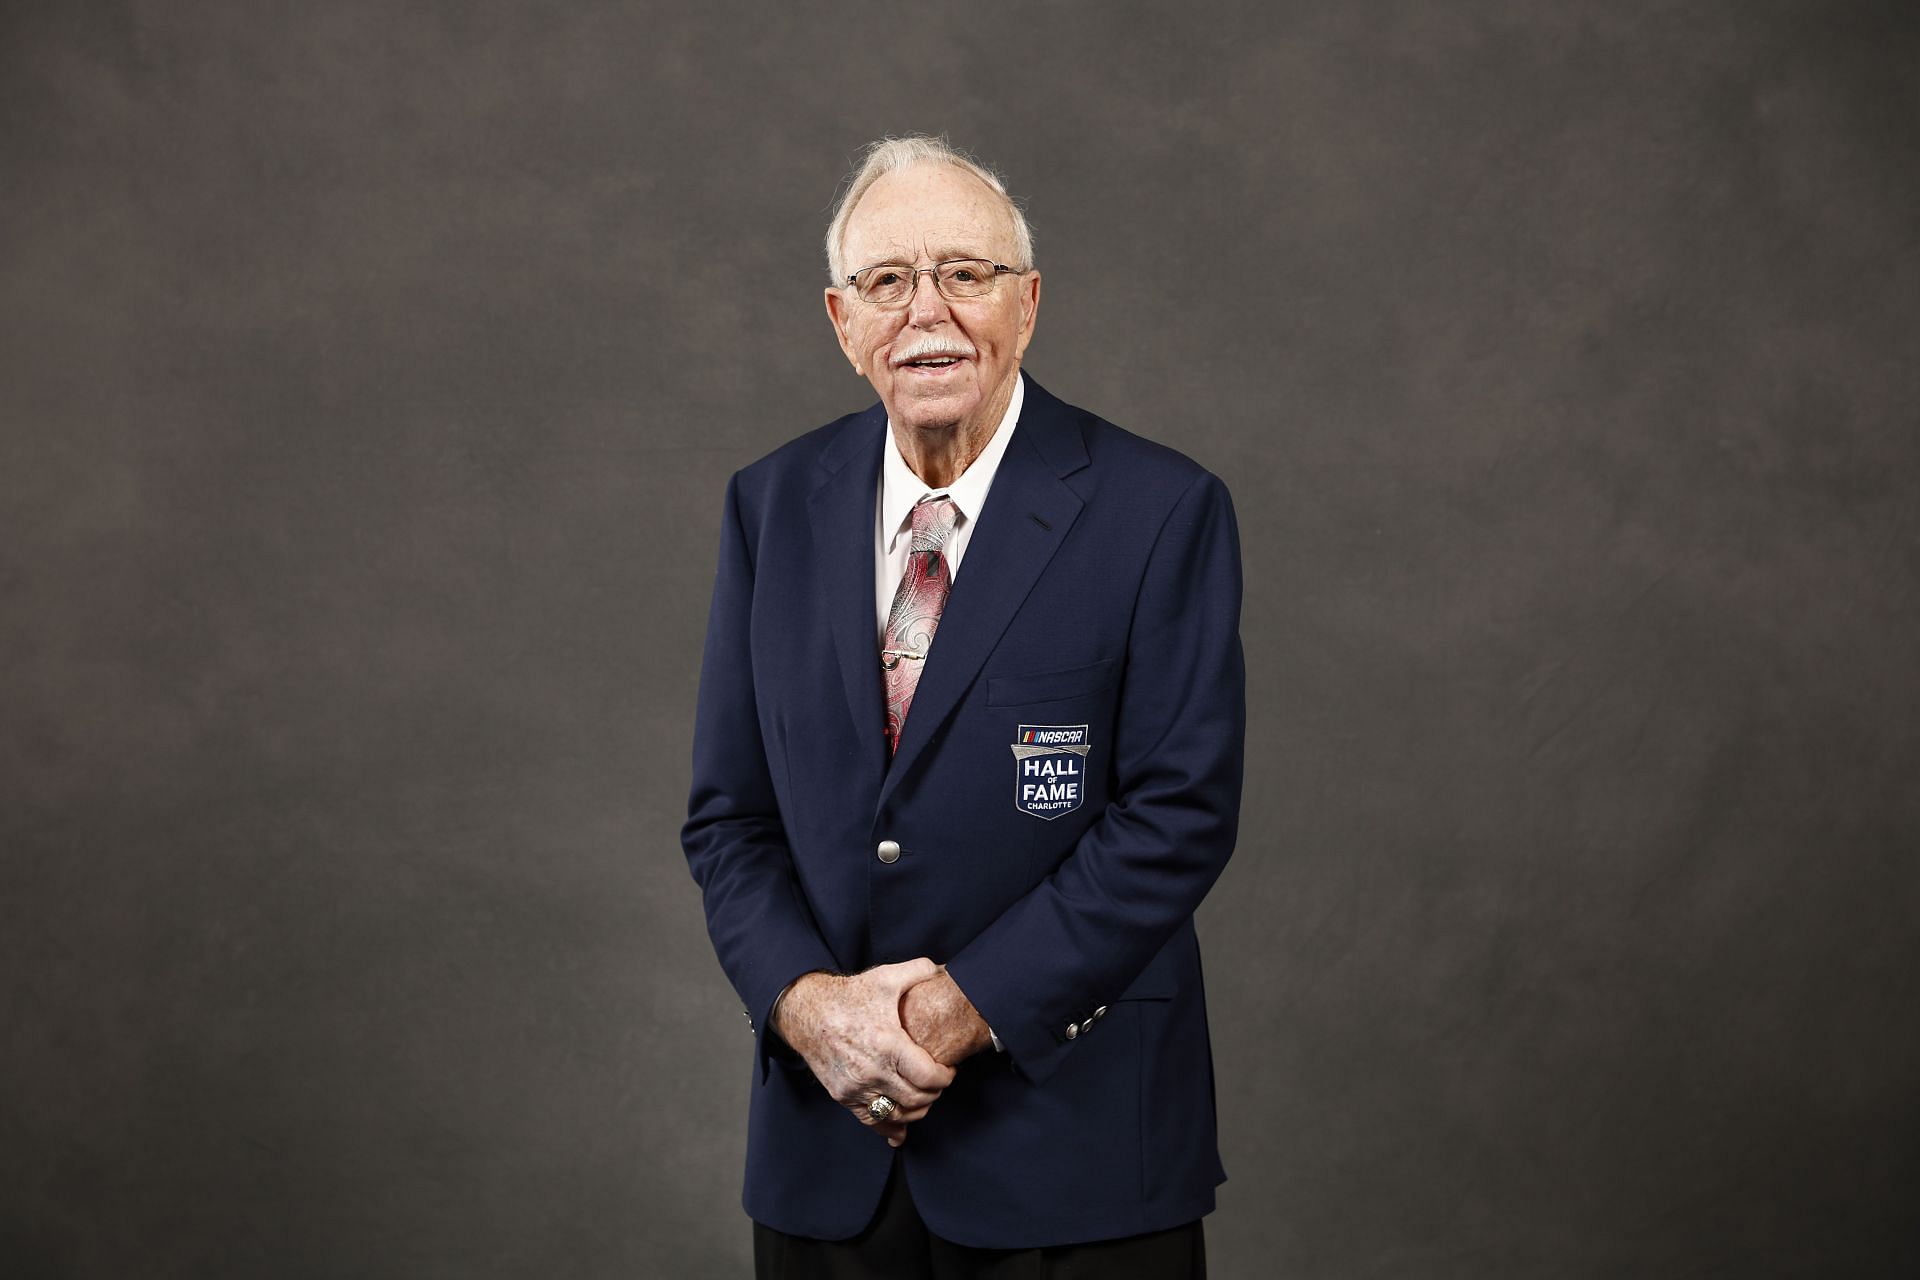 NASCAR Hall of Fame inductee Red Farmer poses for a portrait during the 2021 NASCAR Hall of Fame Induction ceremony at NASCAR Hall of Fame.